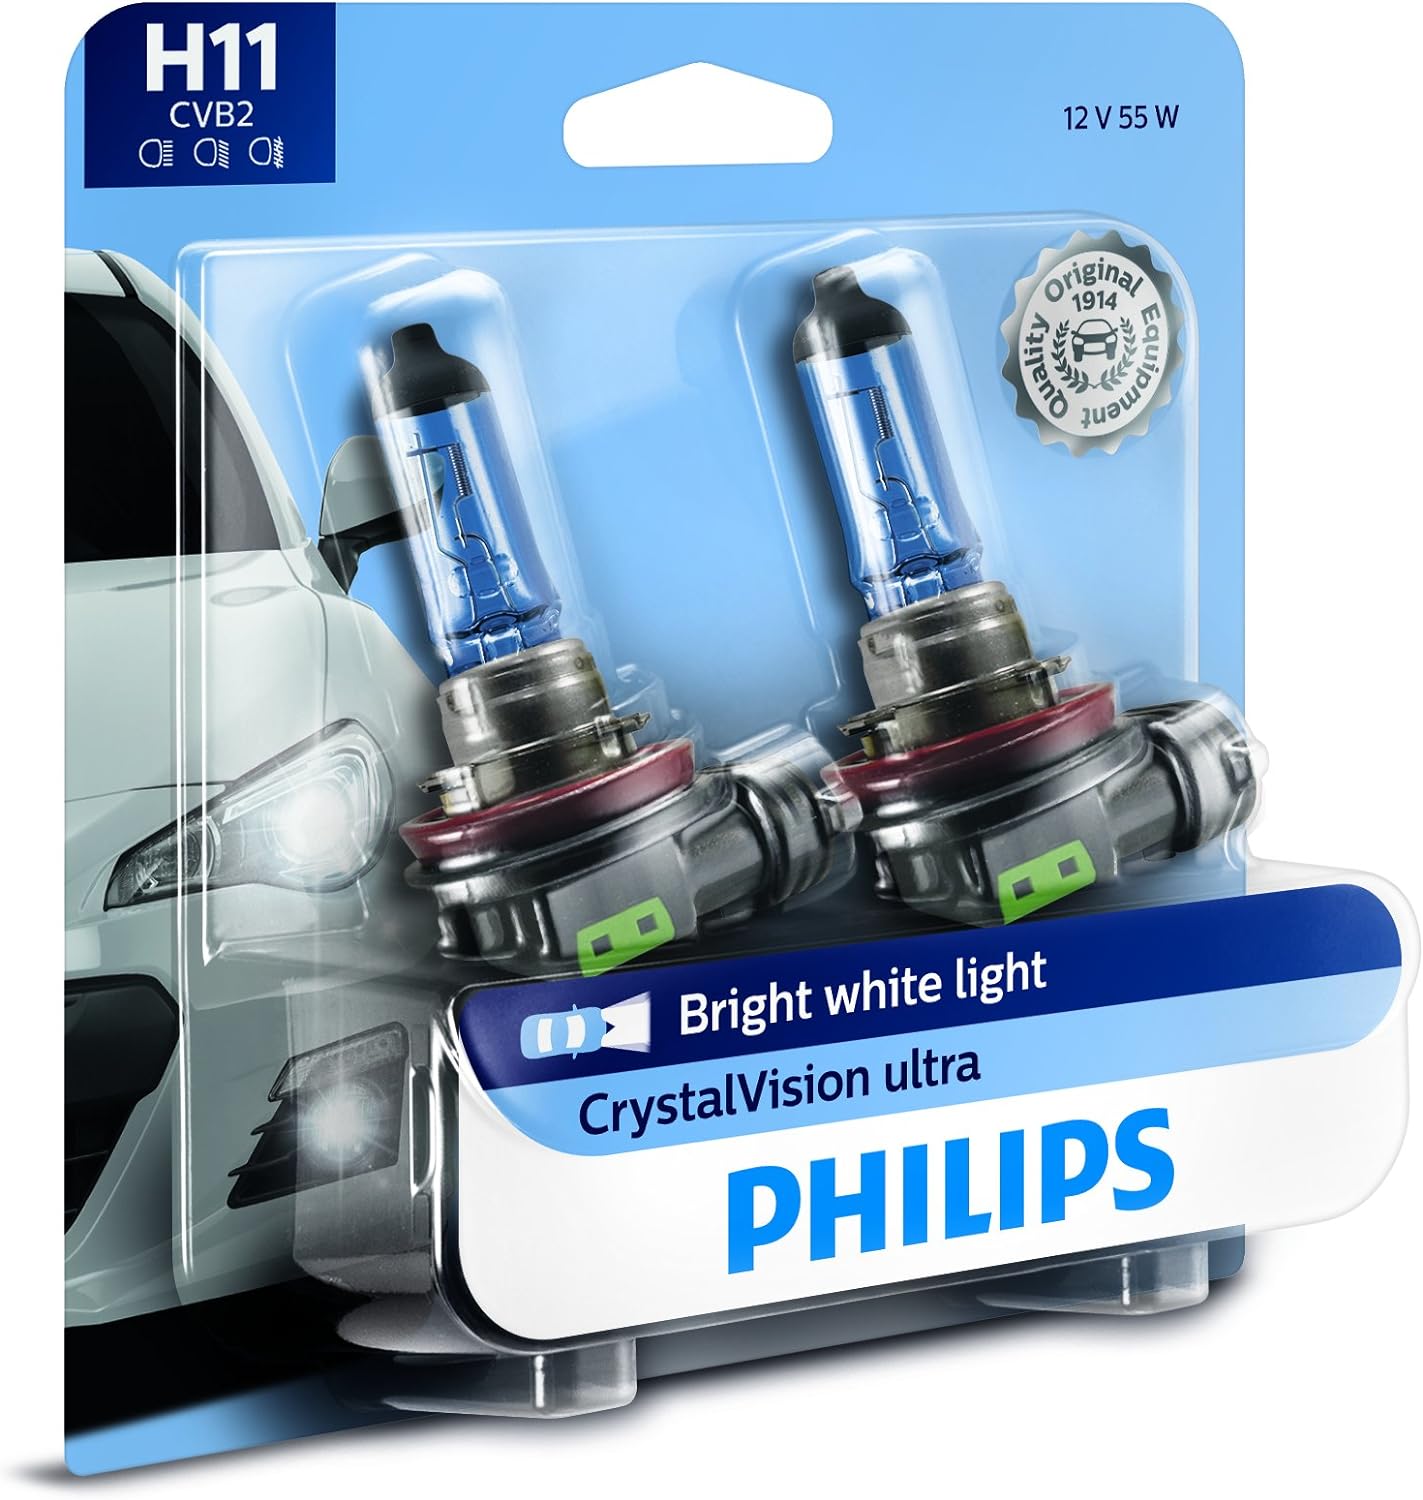 Philips H11 CrystalVision Ultra Upgraded Bright White Headlight Bulb, 2 Pack